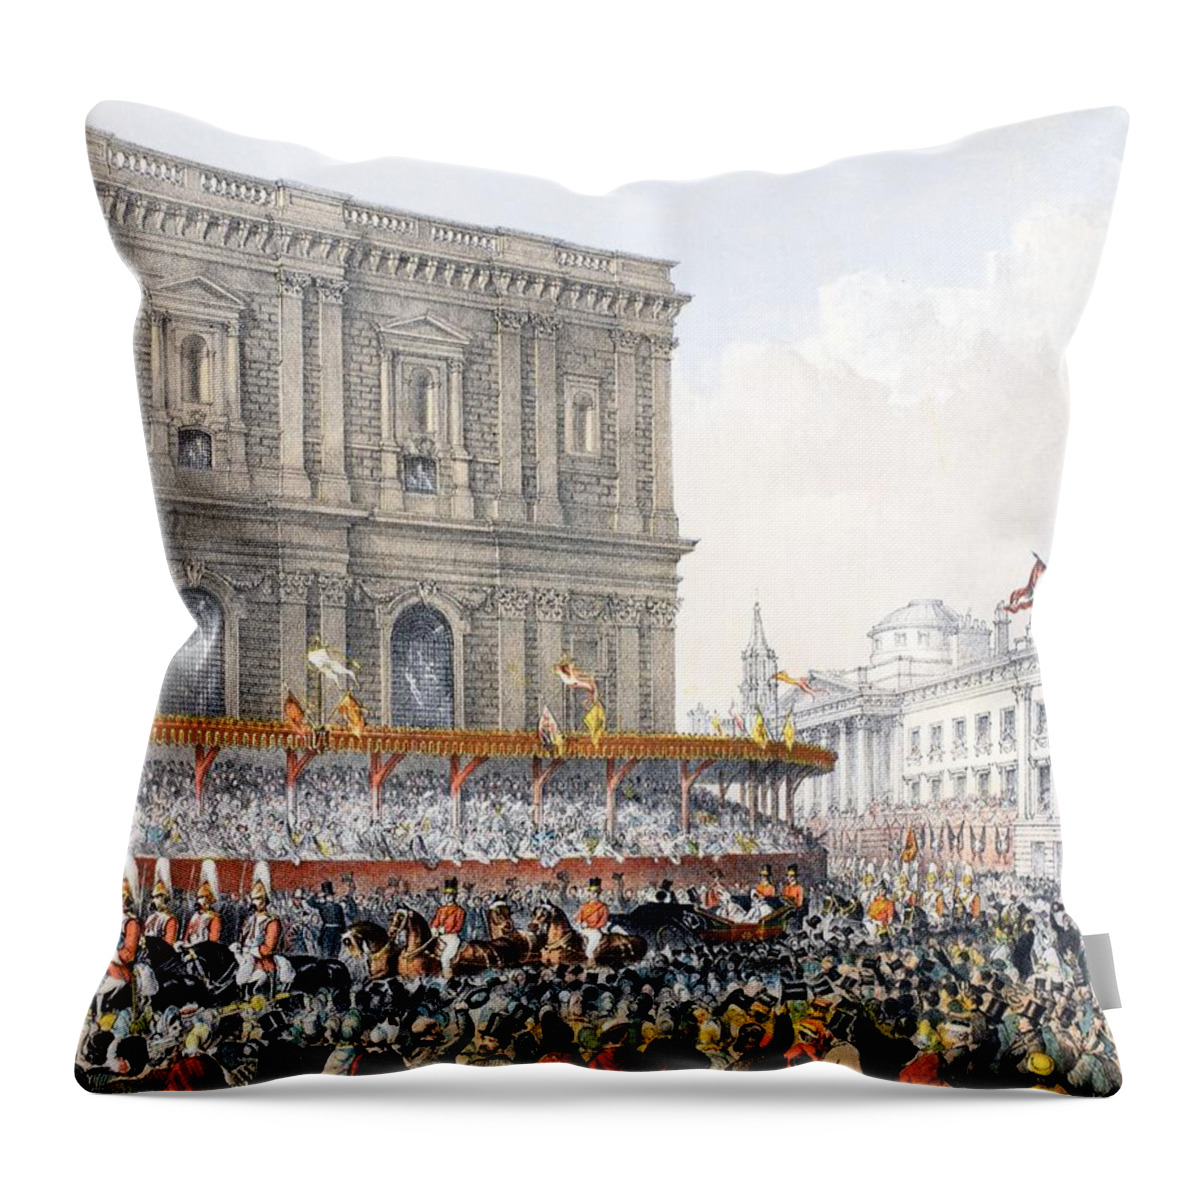 Arrival Throw Pillow featuring the drawing St Pauls, 7th March 1863, From A by English School